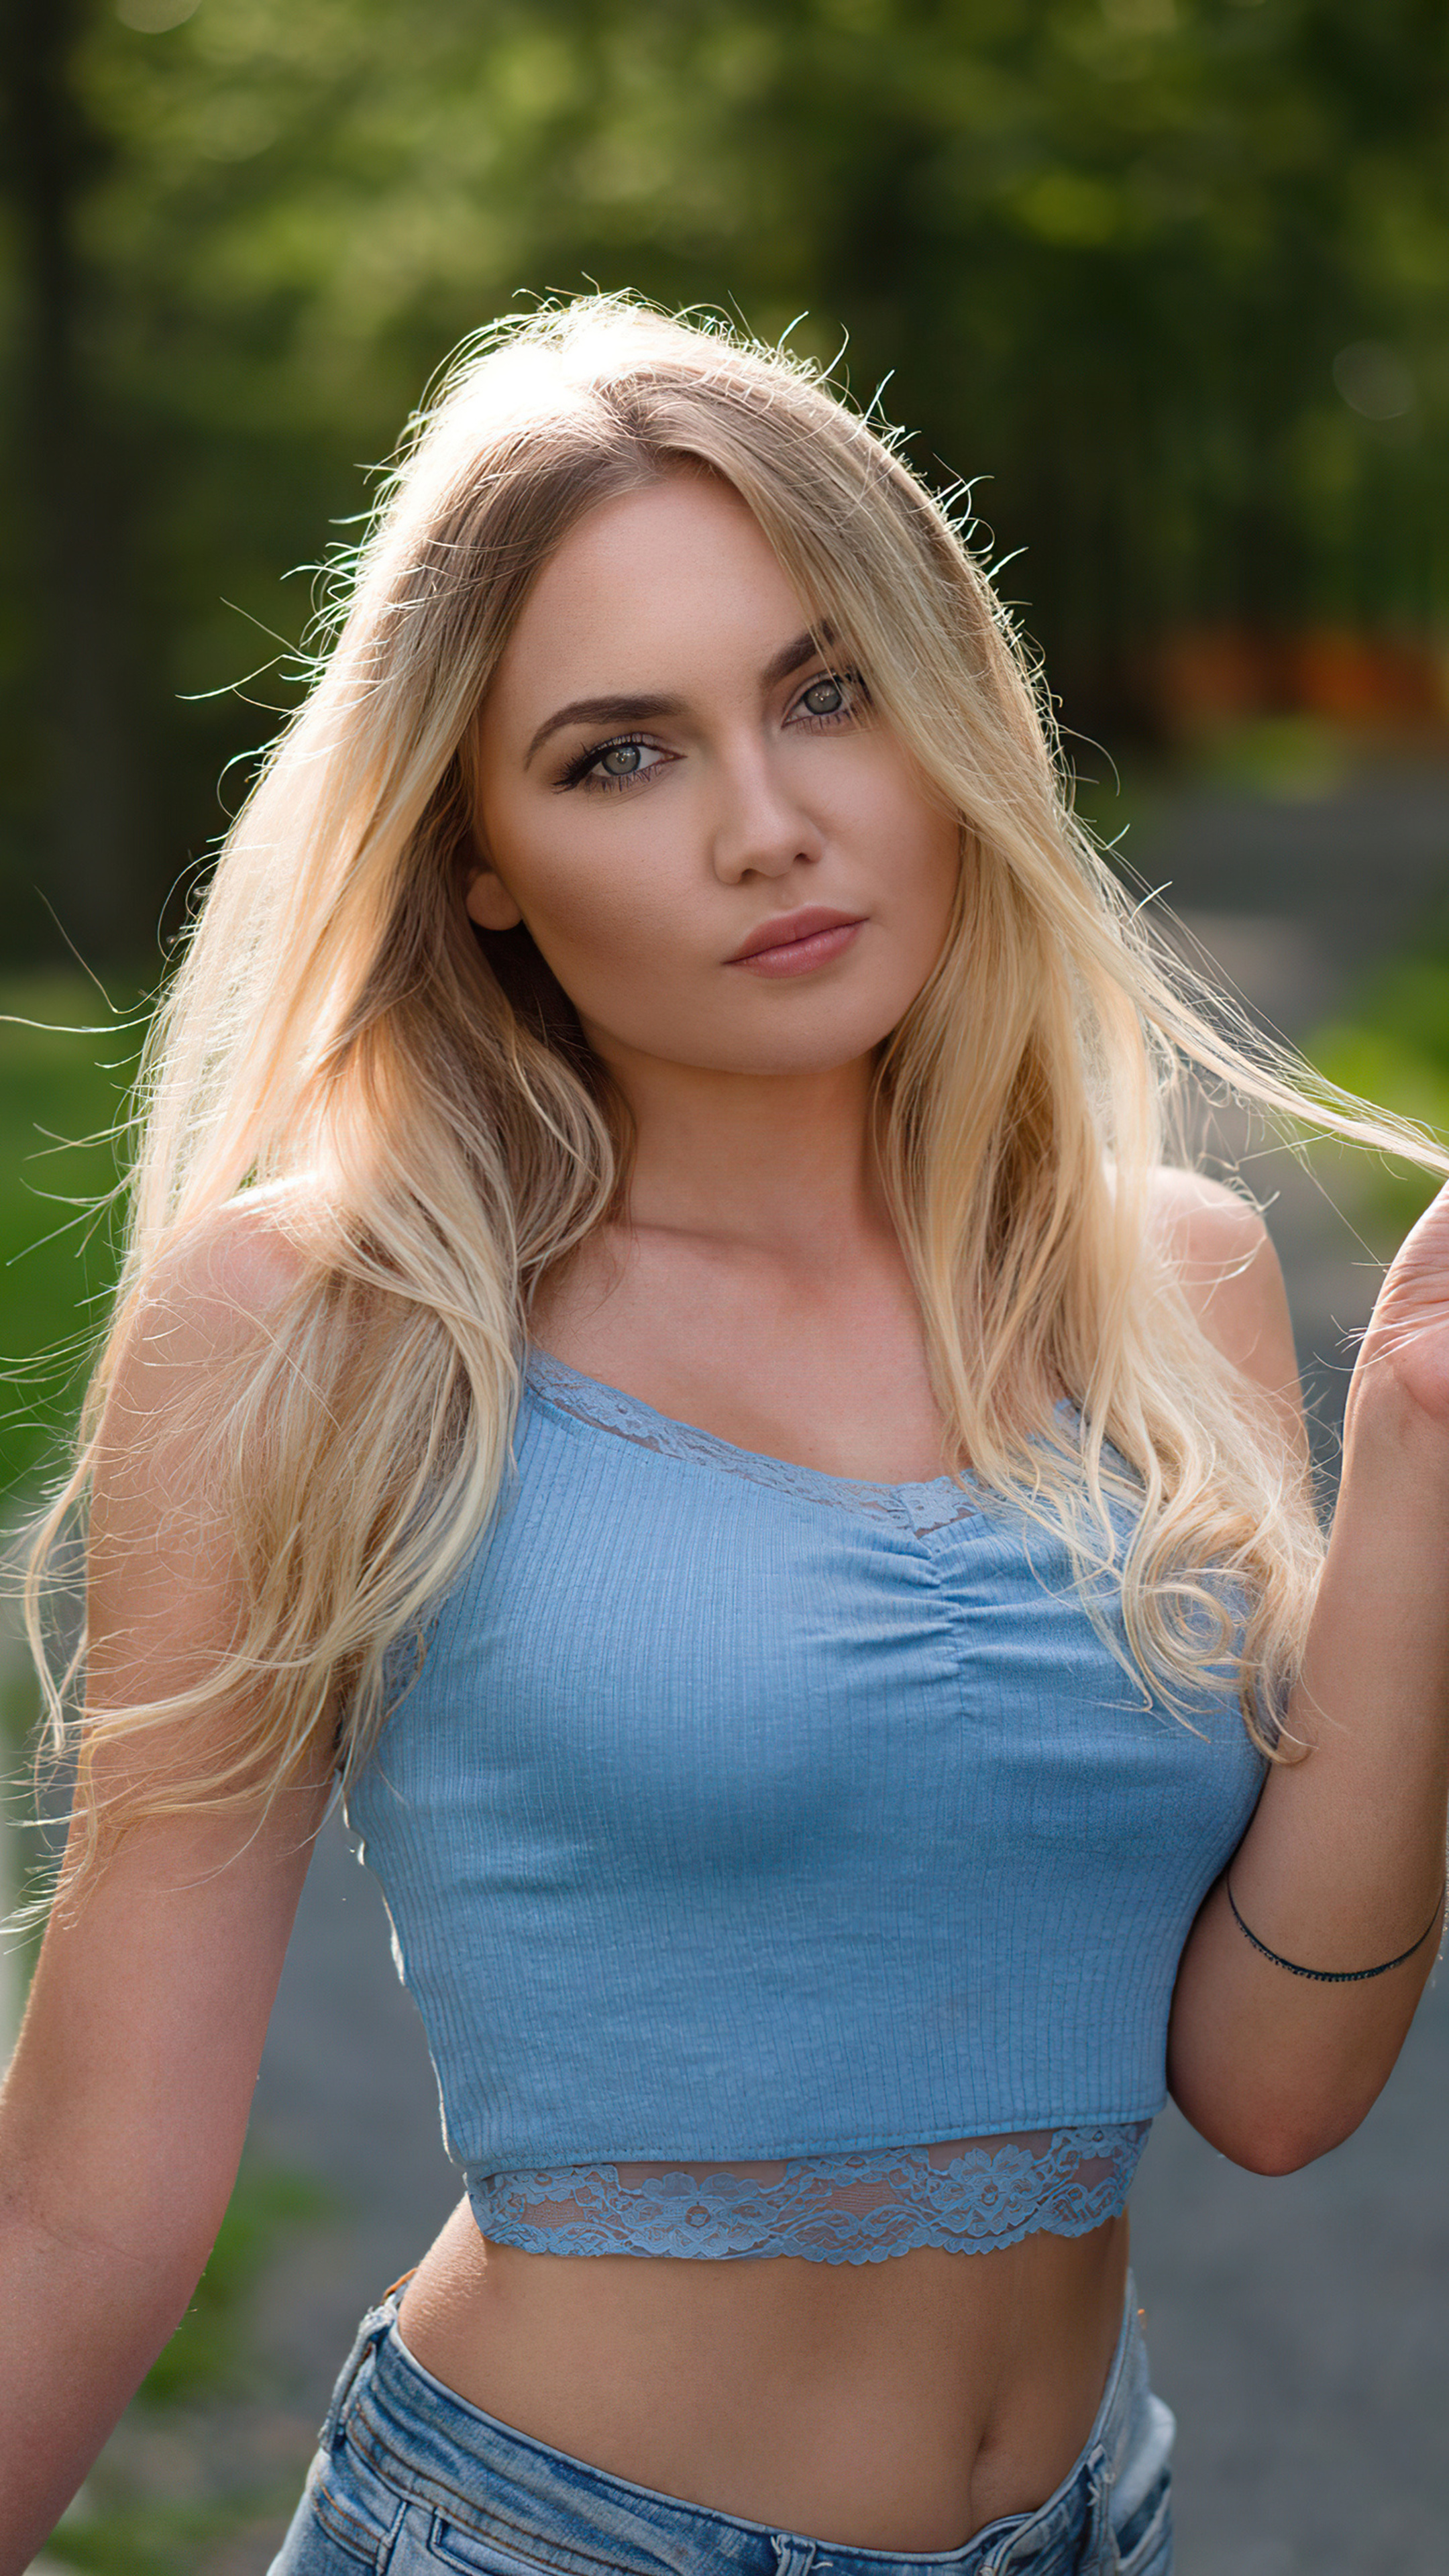 Most Beautiful Women: Blonde girl, A standard photography pose, Charming. 2160x3840 4K Background.